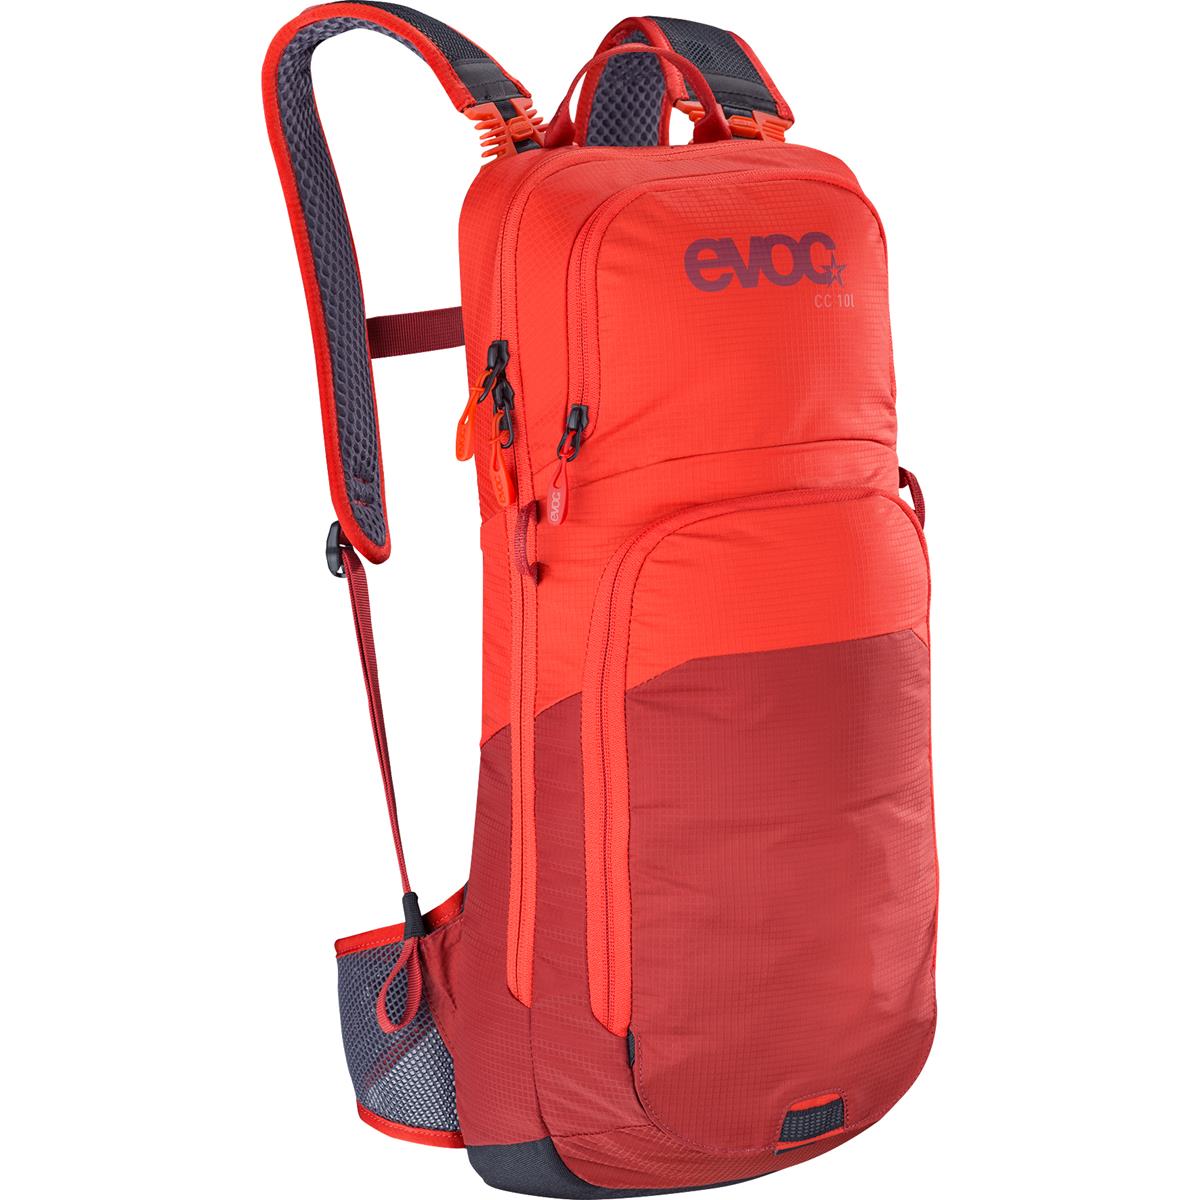 Evoc Backpack with Hydration System Compartment Cross Country Orange/Chili Red, 10 Liter